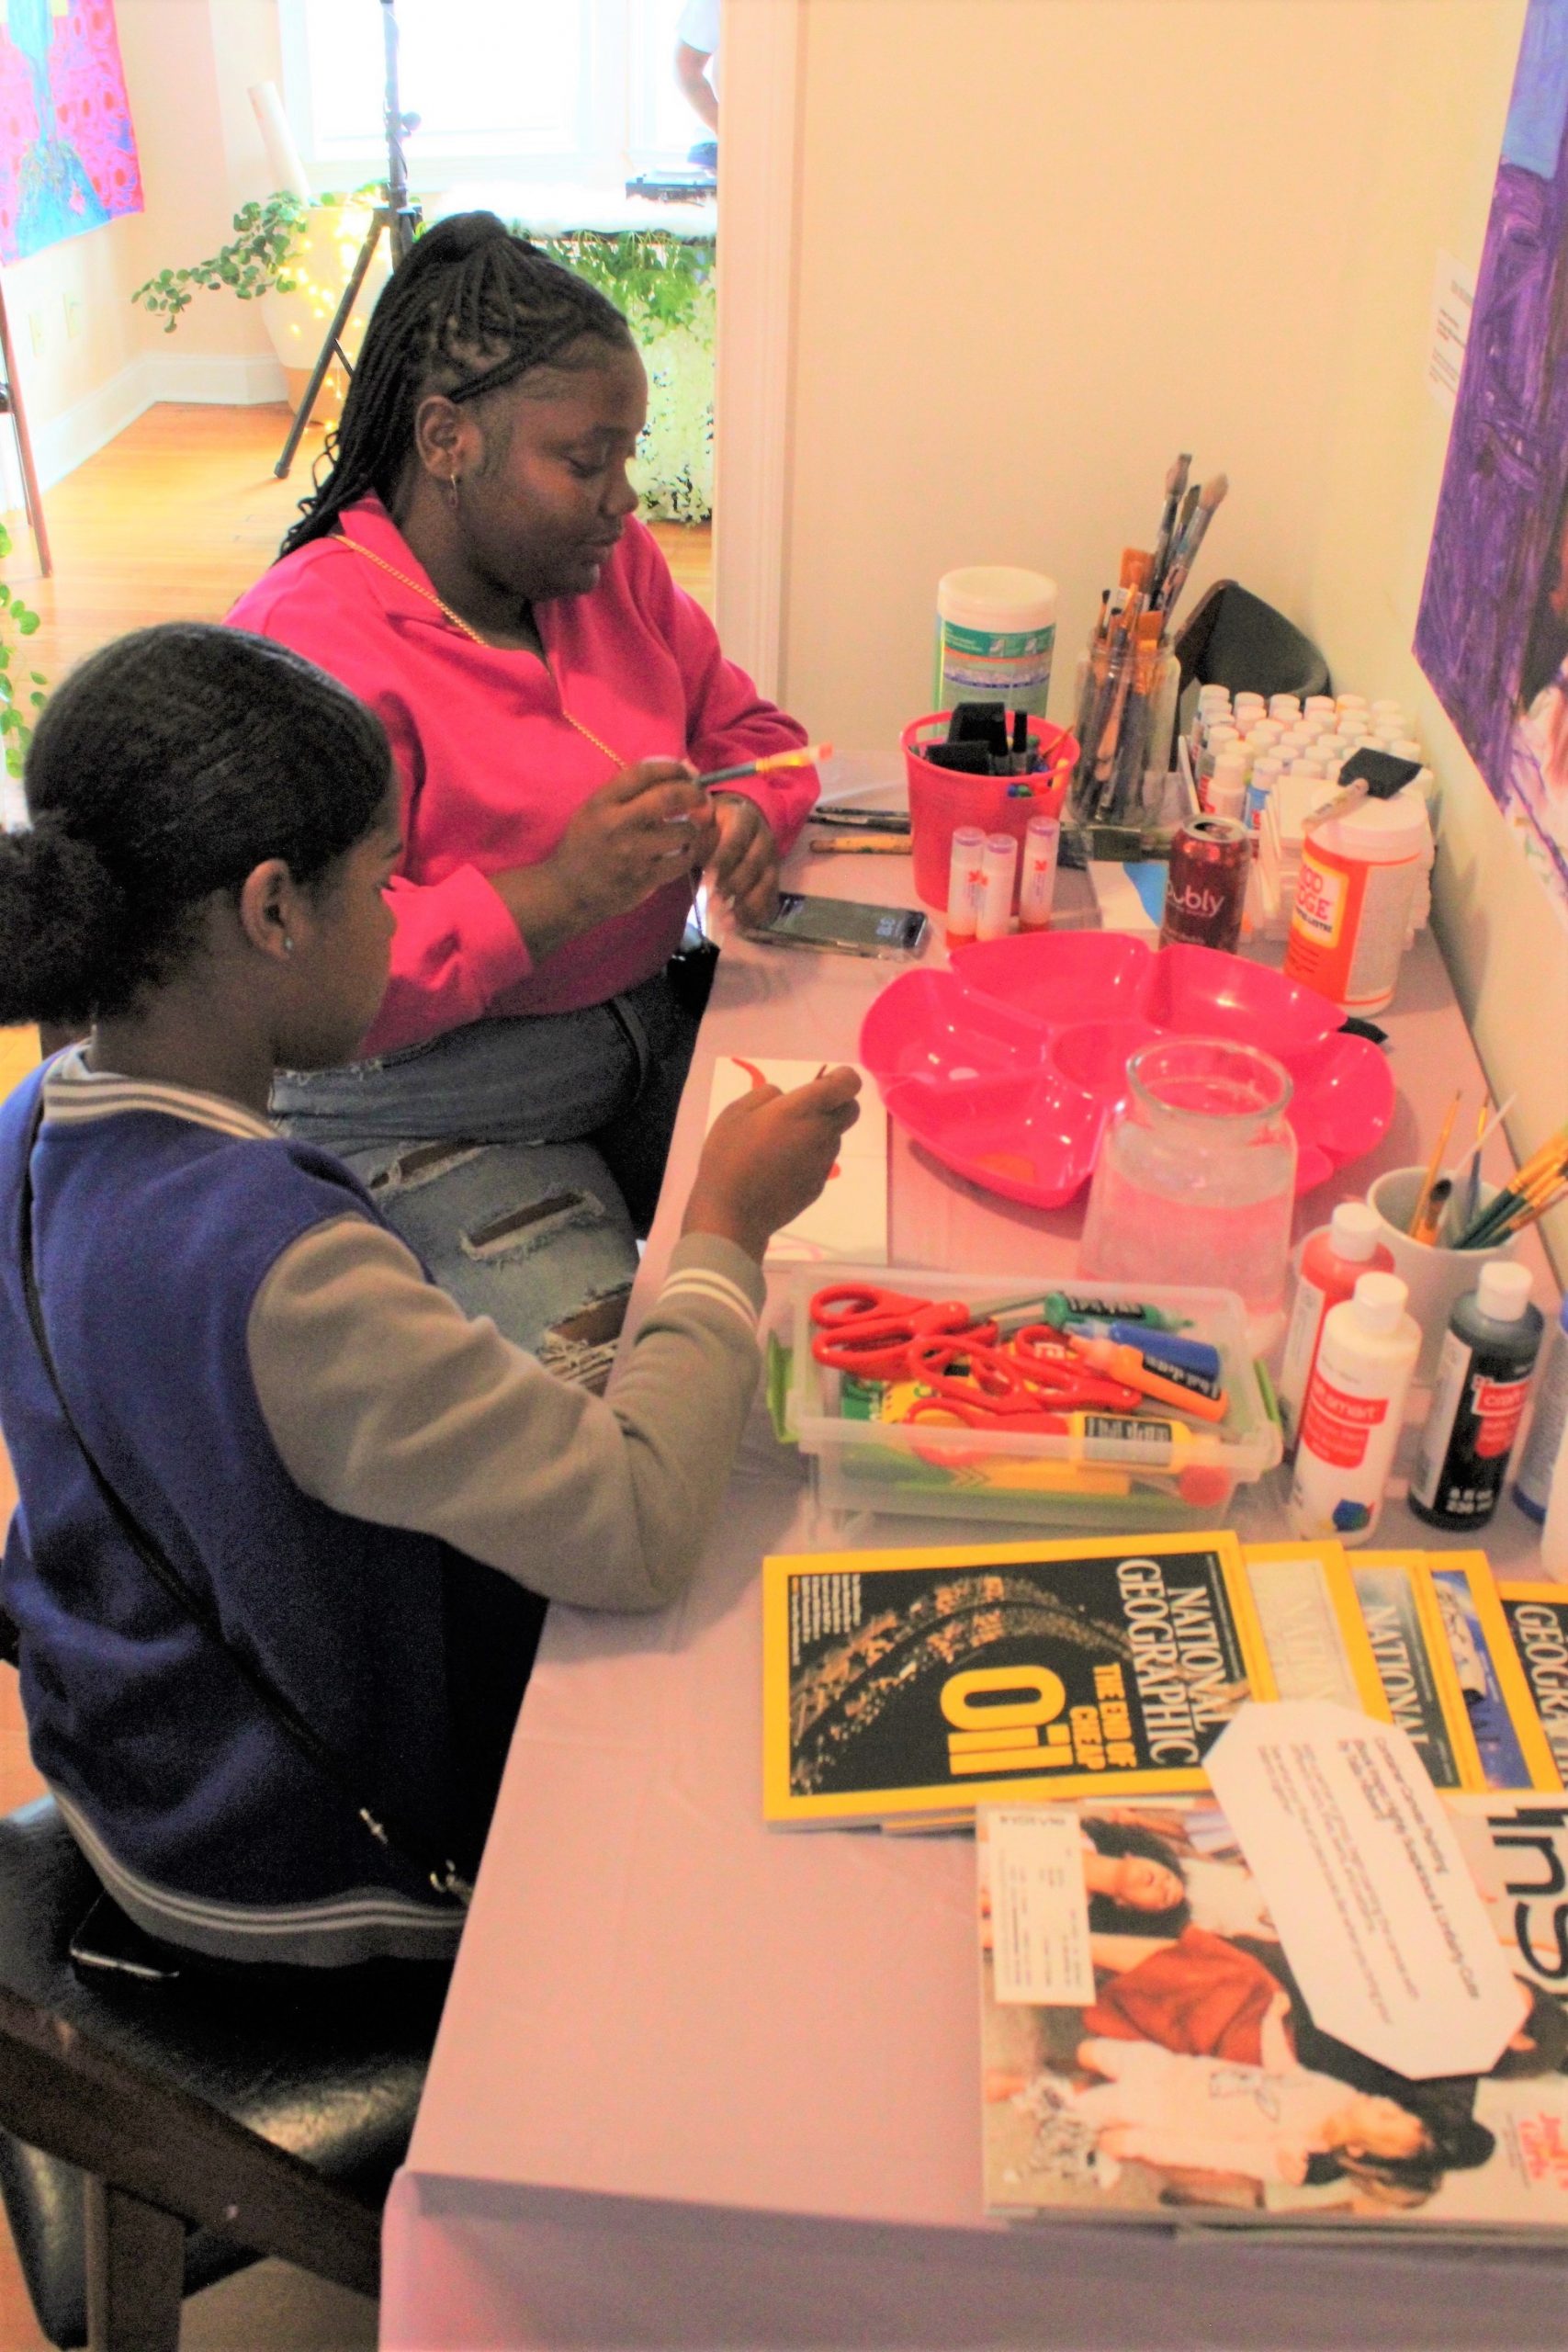 a woman and a girl doing art work with supplies at a desk